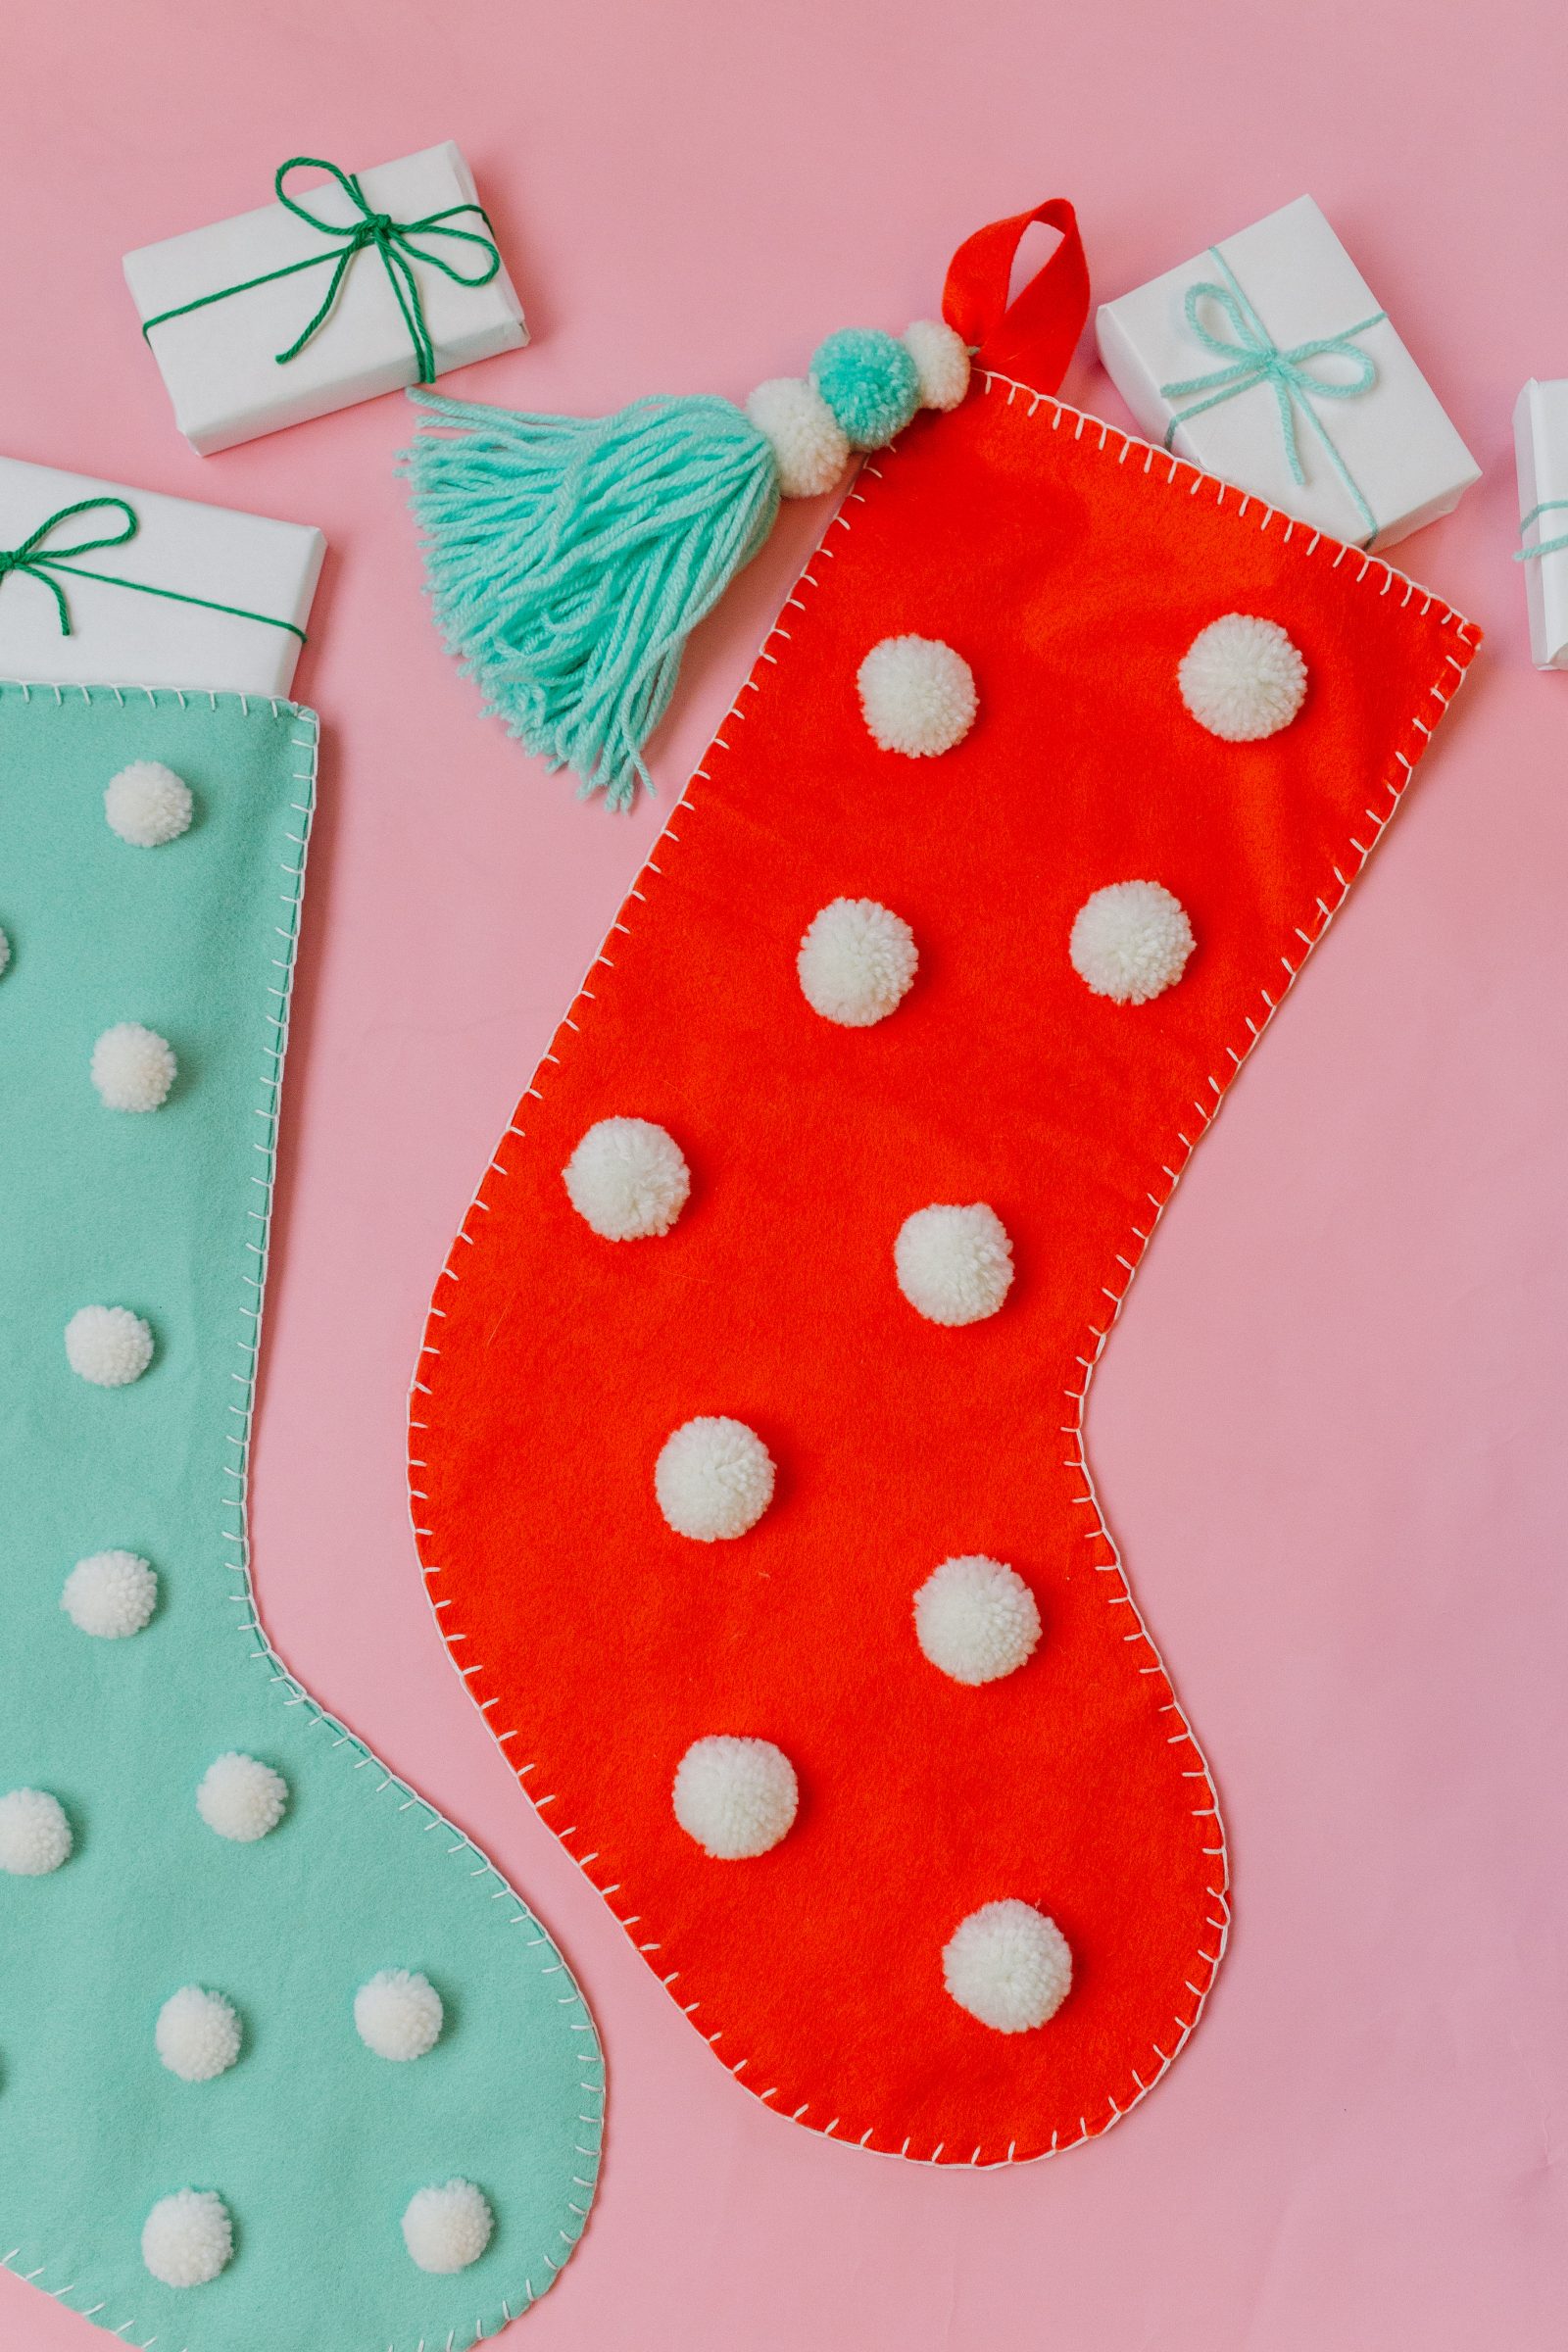 Christmas Crafts: Stitched Felt and Pom Pom Stockings + a tutorial featured by Top US Craft Blog + The Pretty Life Girls